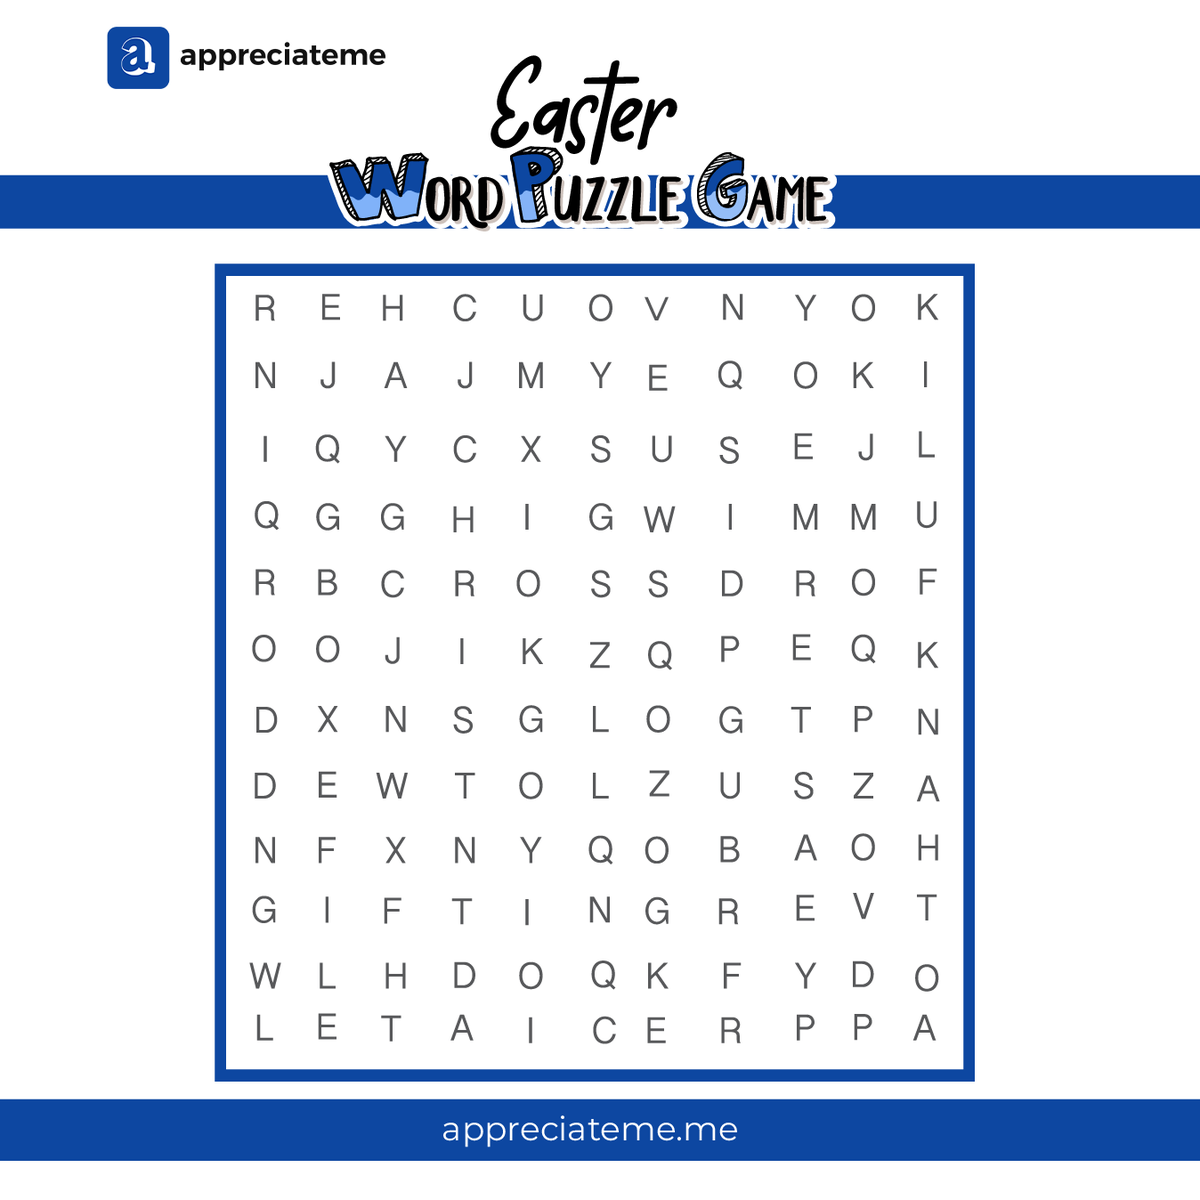 Solve and win

Fine 6 Easter words and stand a chance of winning up to 5k vouchers to shop at your preferred stores

#appreciateme #giftideas2024
#easter